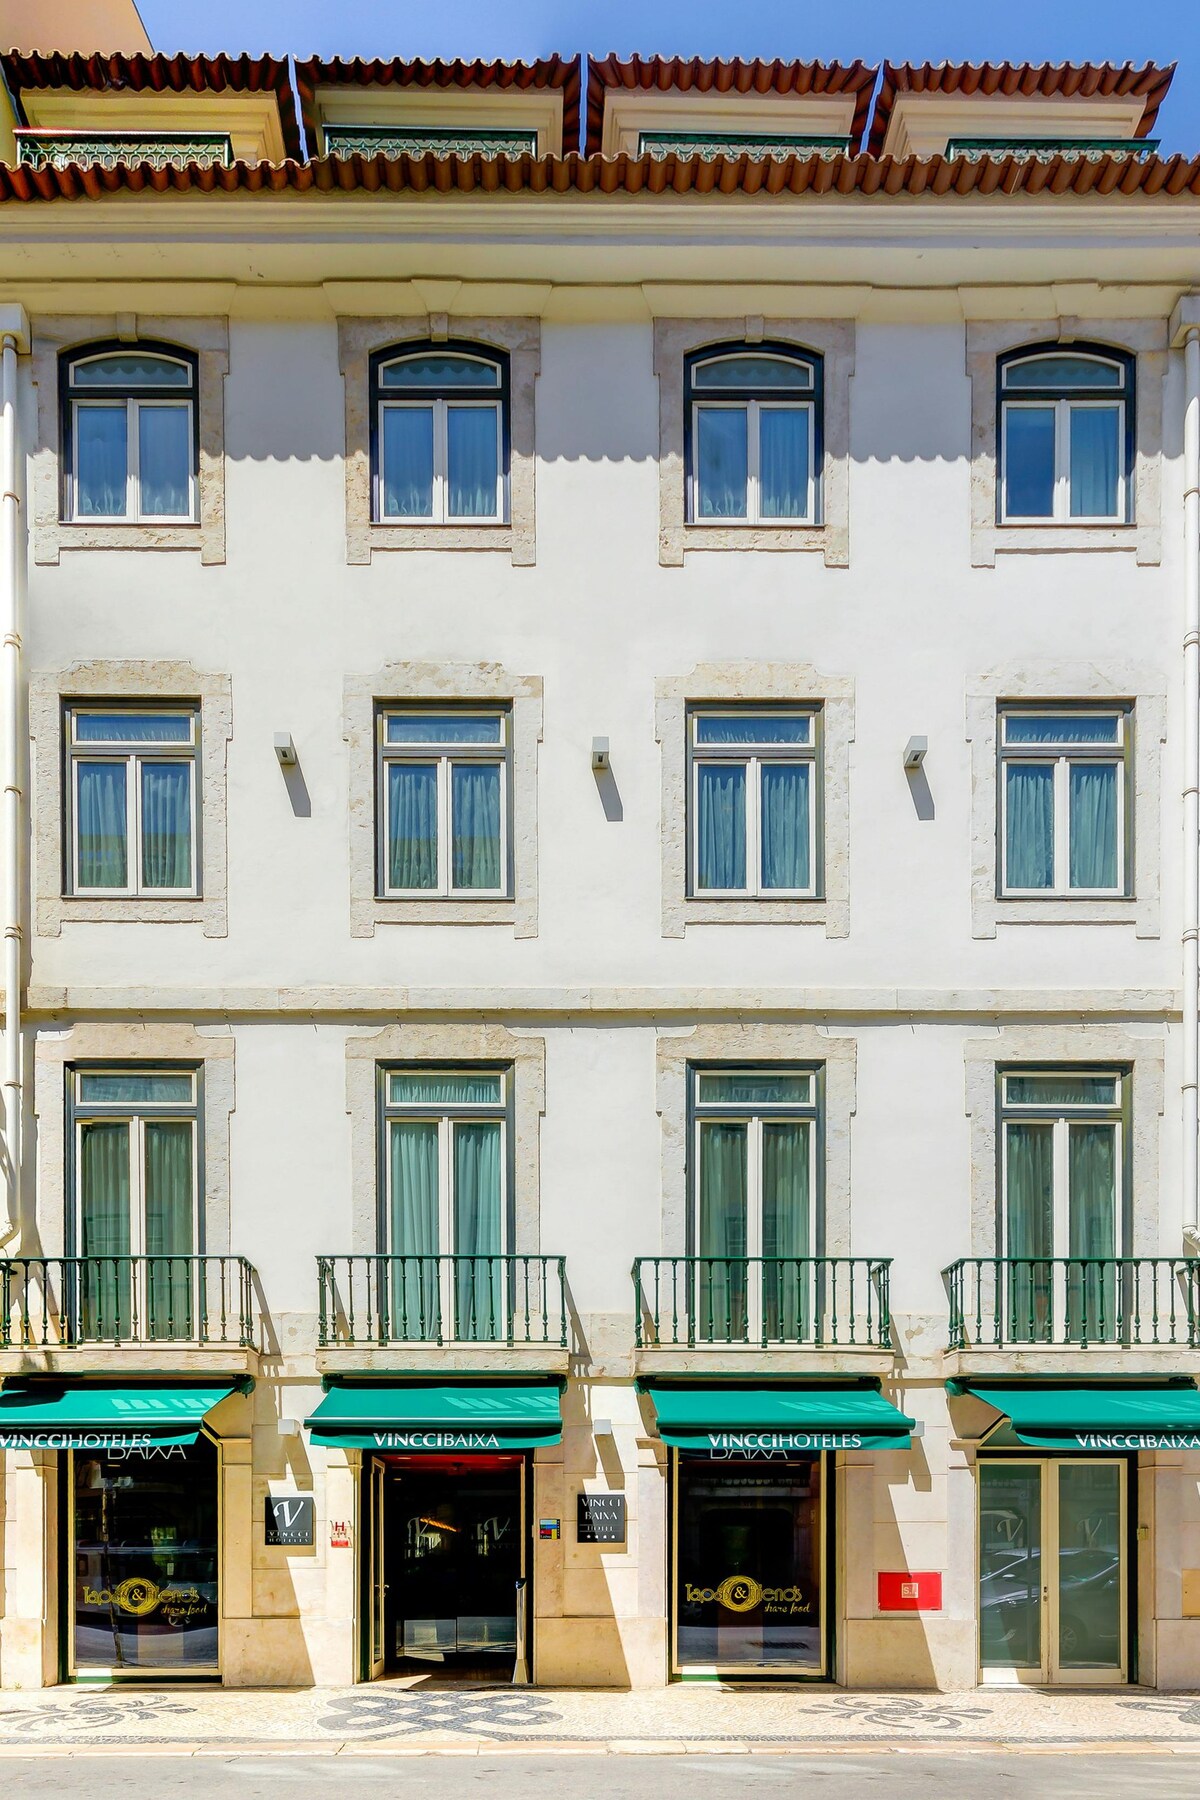 Exclusive four-star hotel in the centre of Lisbon